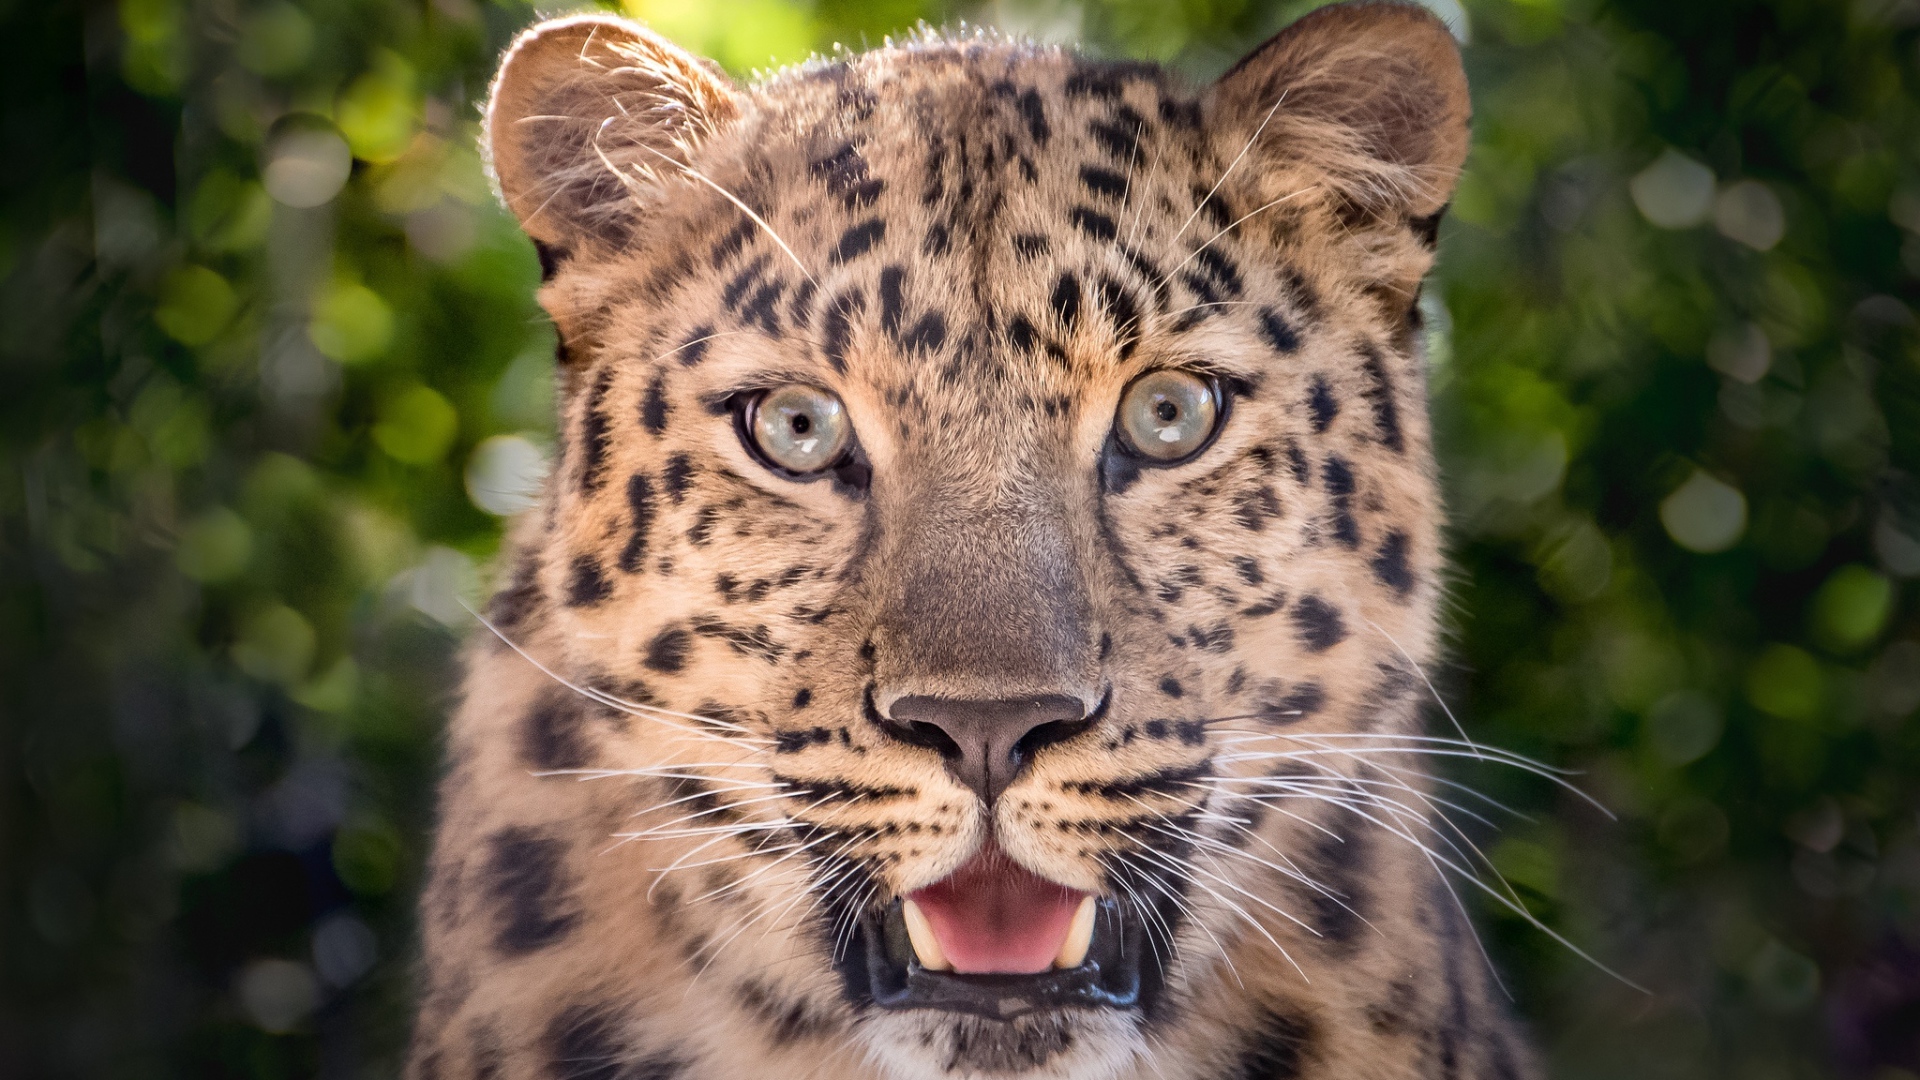 Spotted leopard with open mouth